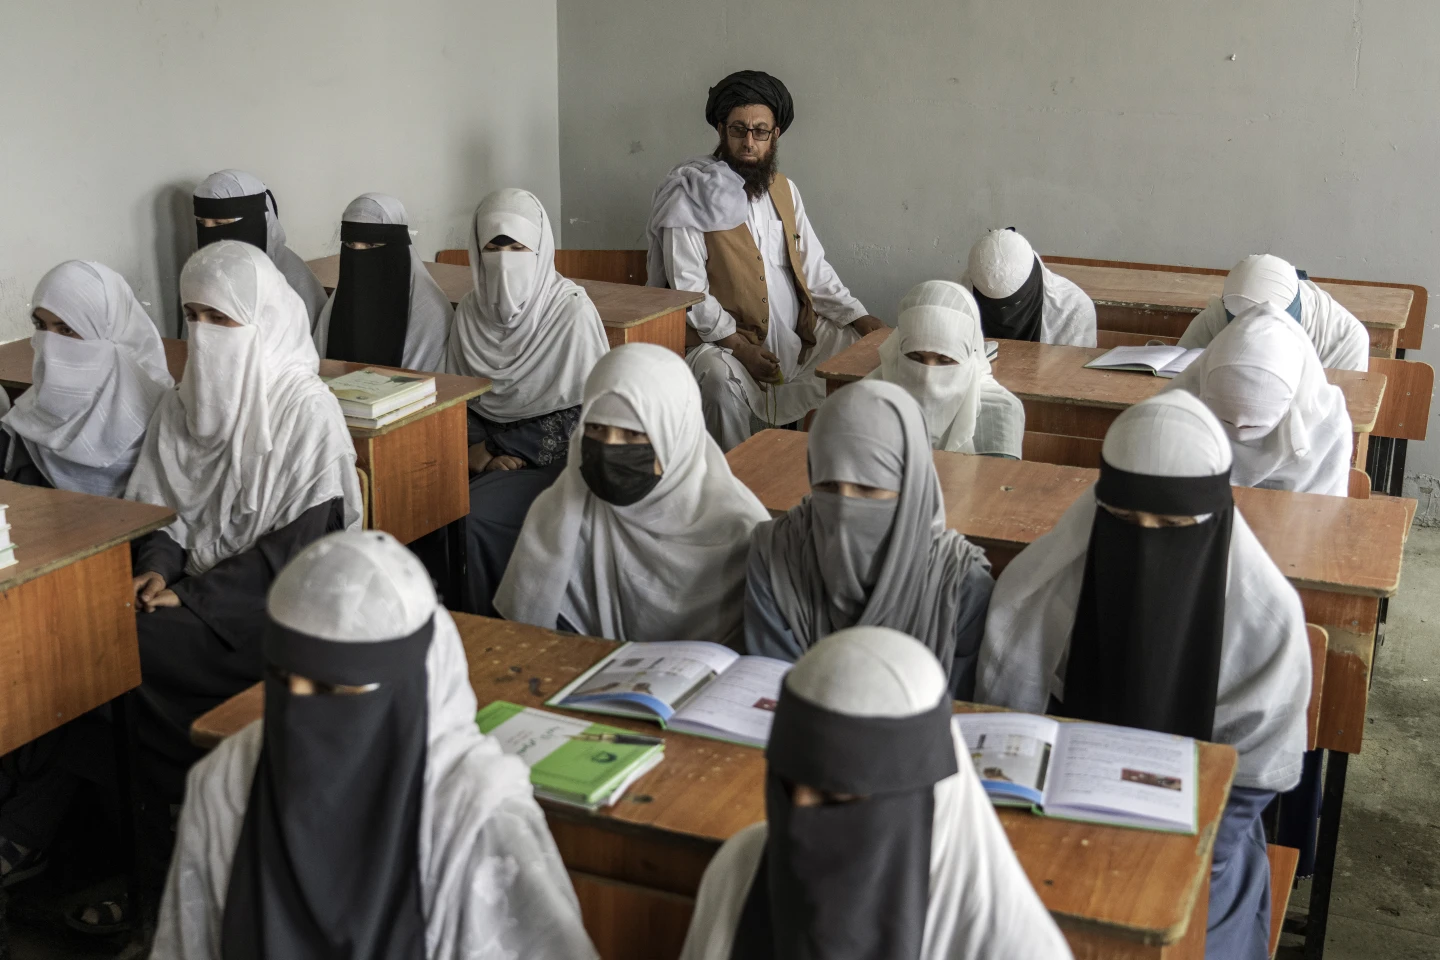 2 years ago, the Taliban banned girls from school. It’s a worsening crisis for all Afghans